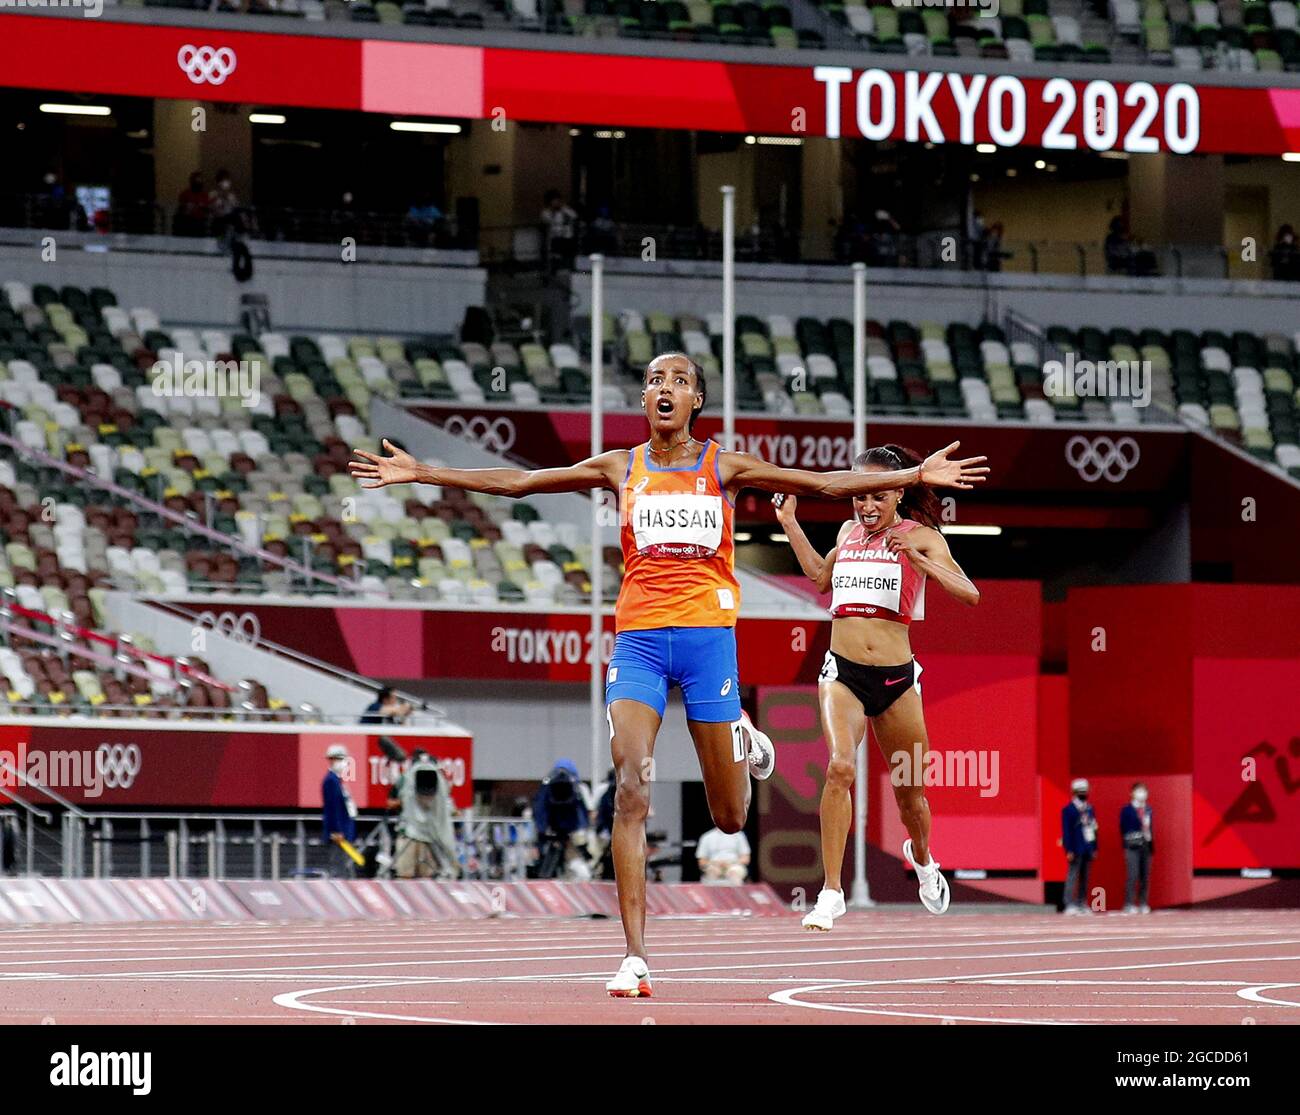 Sifan Hassan of the Netherlands and Kalkidan Gezahegne of Bahrain cross the finish line in the Women's 10,000 meter final at Olympic Stadium during the 2020 Summer Olympics in Tokyo, Japan on Saturday, August 7, 2021. Sifan Hassan of the Netherlands took gold with a time of 29:55.32, Kalkidan Gezahegne of Bahrain took silver with a time of 29:56.18 and Letesenbet Gidey of Ethiopia took bronze with a time of 30:01.72.  Photo by Bob Strong/UPI Stock Photo